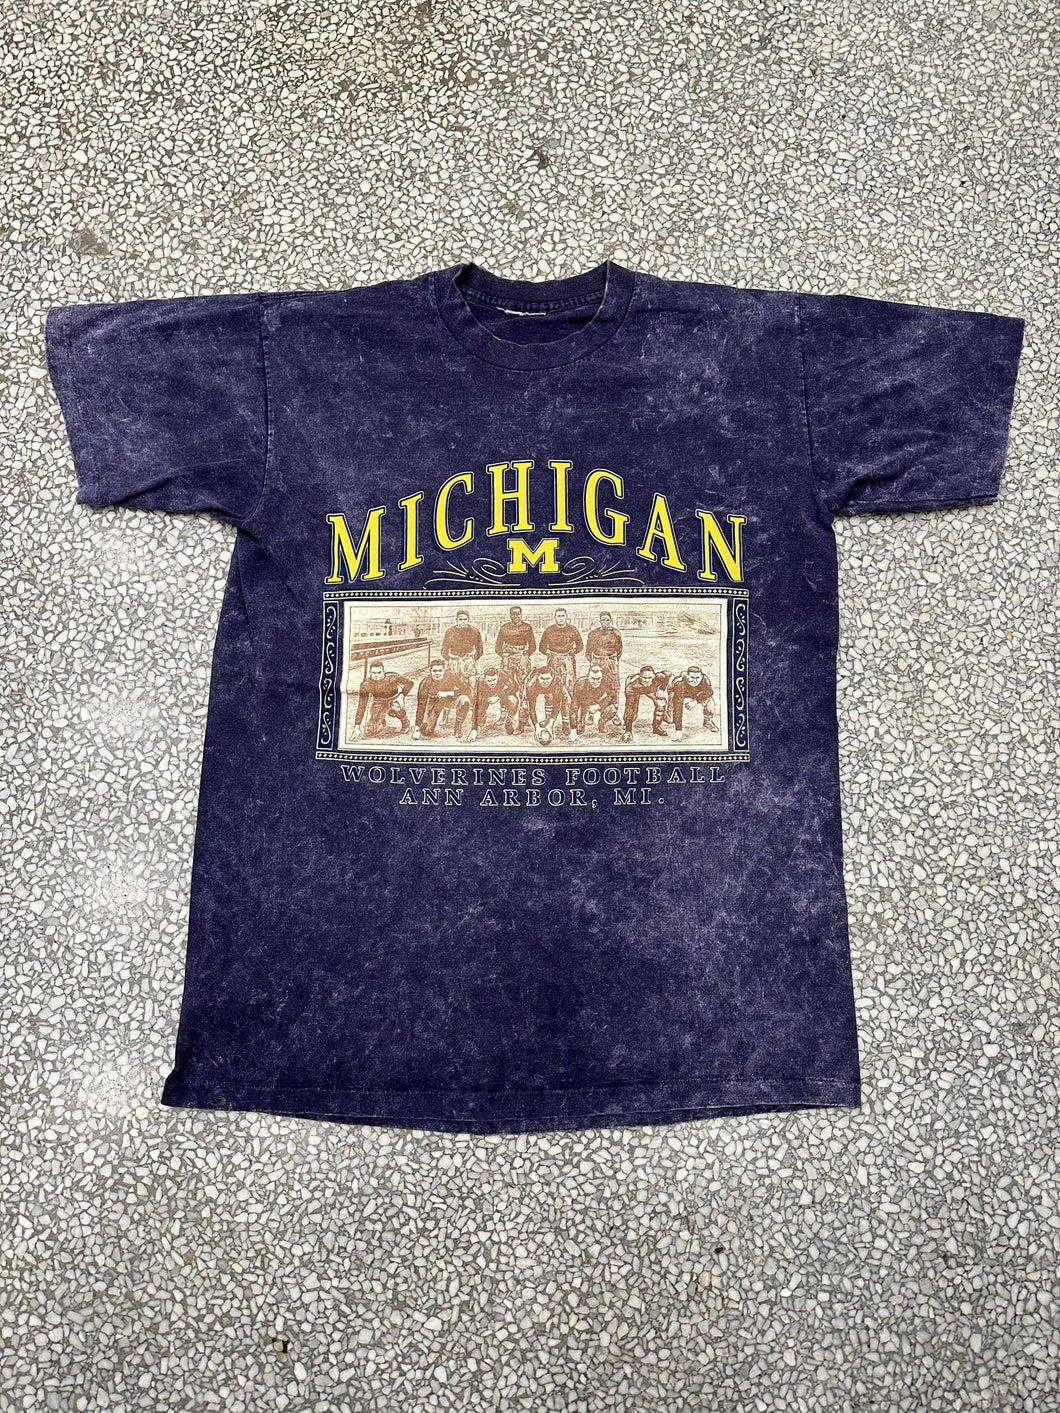 Michigan Wolverines Vintage 90s Football Team Roster Overdyed Navy ABC Vintage 